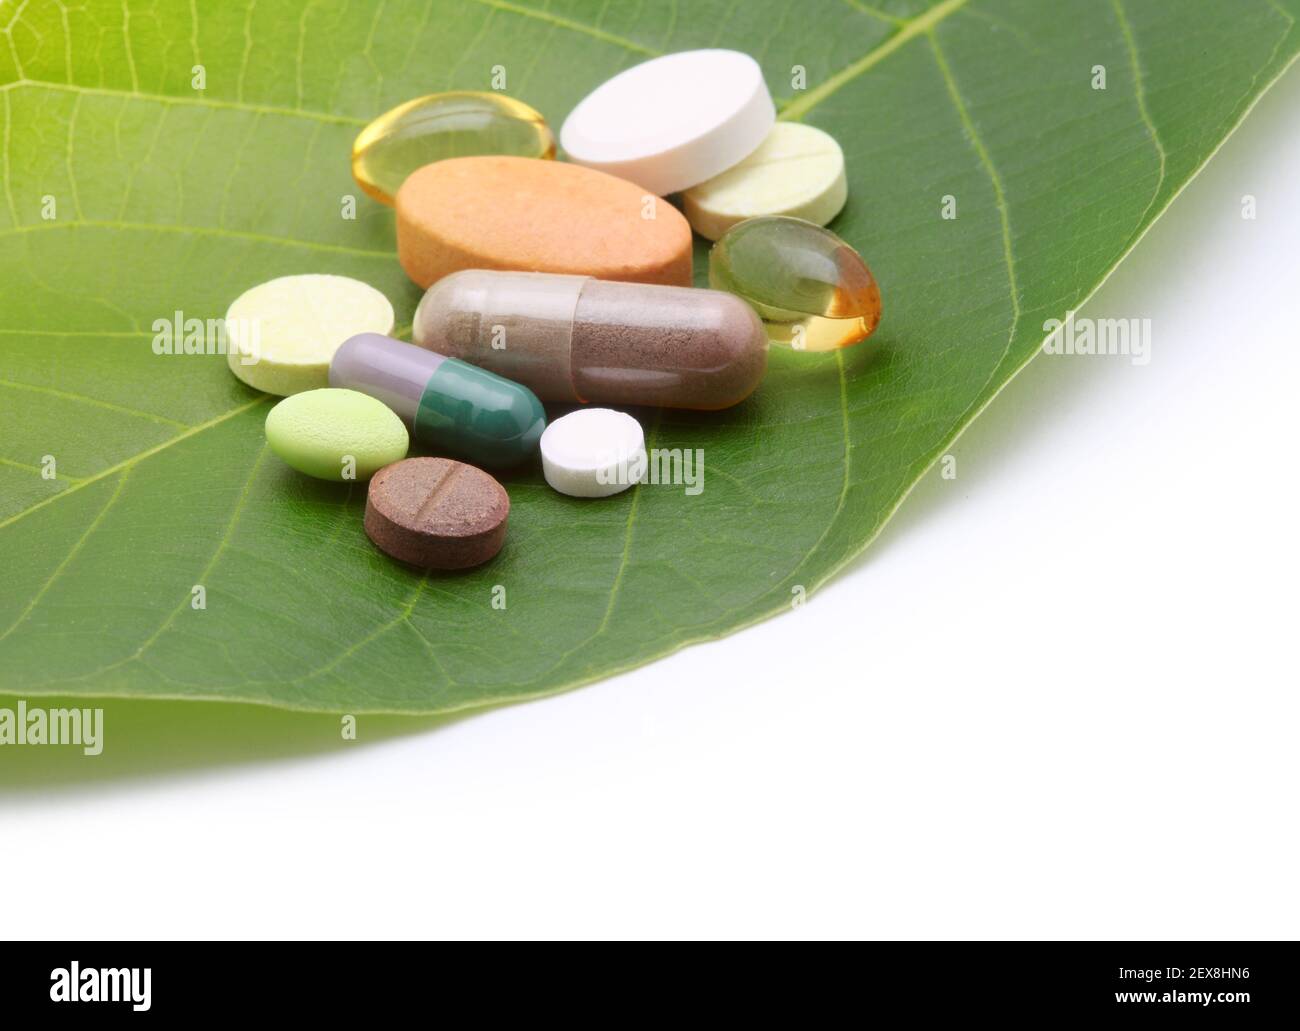 Vitamins pills and tablets Stock Photo